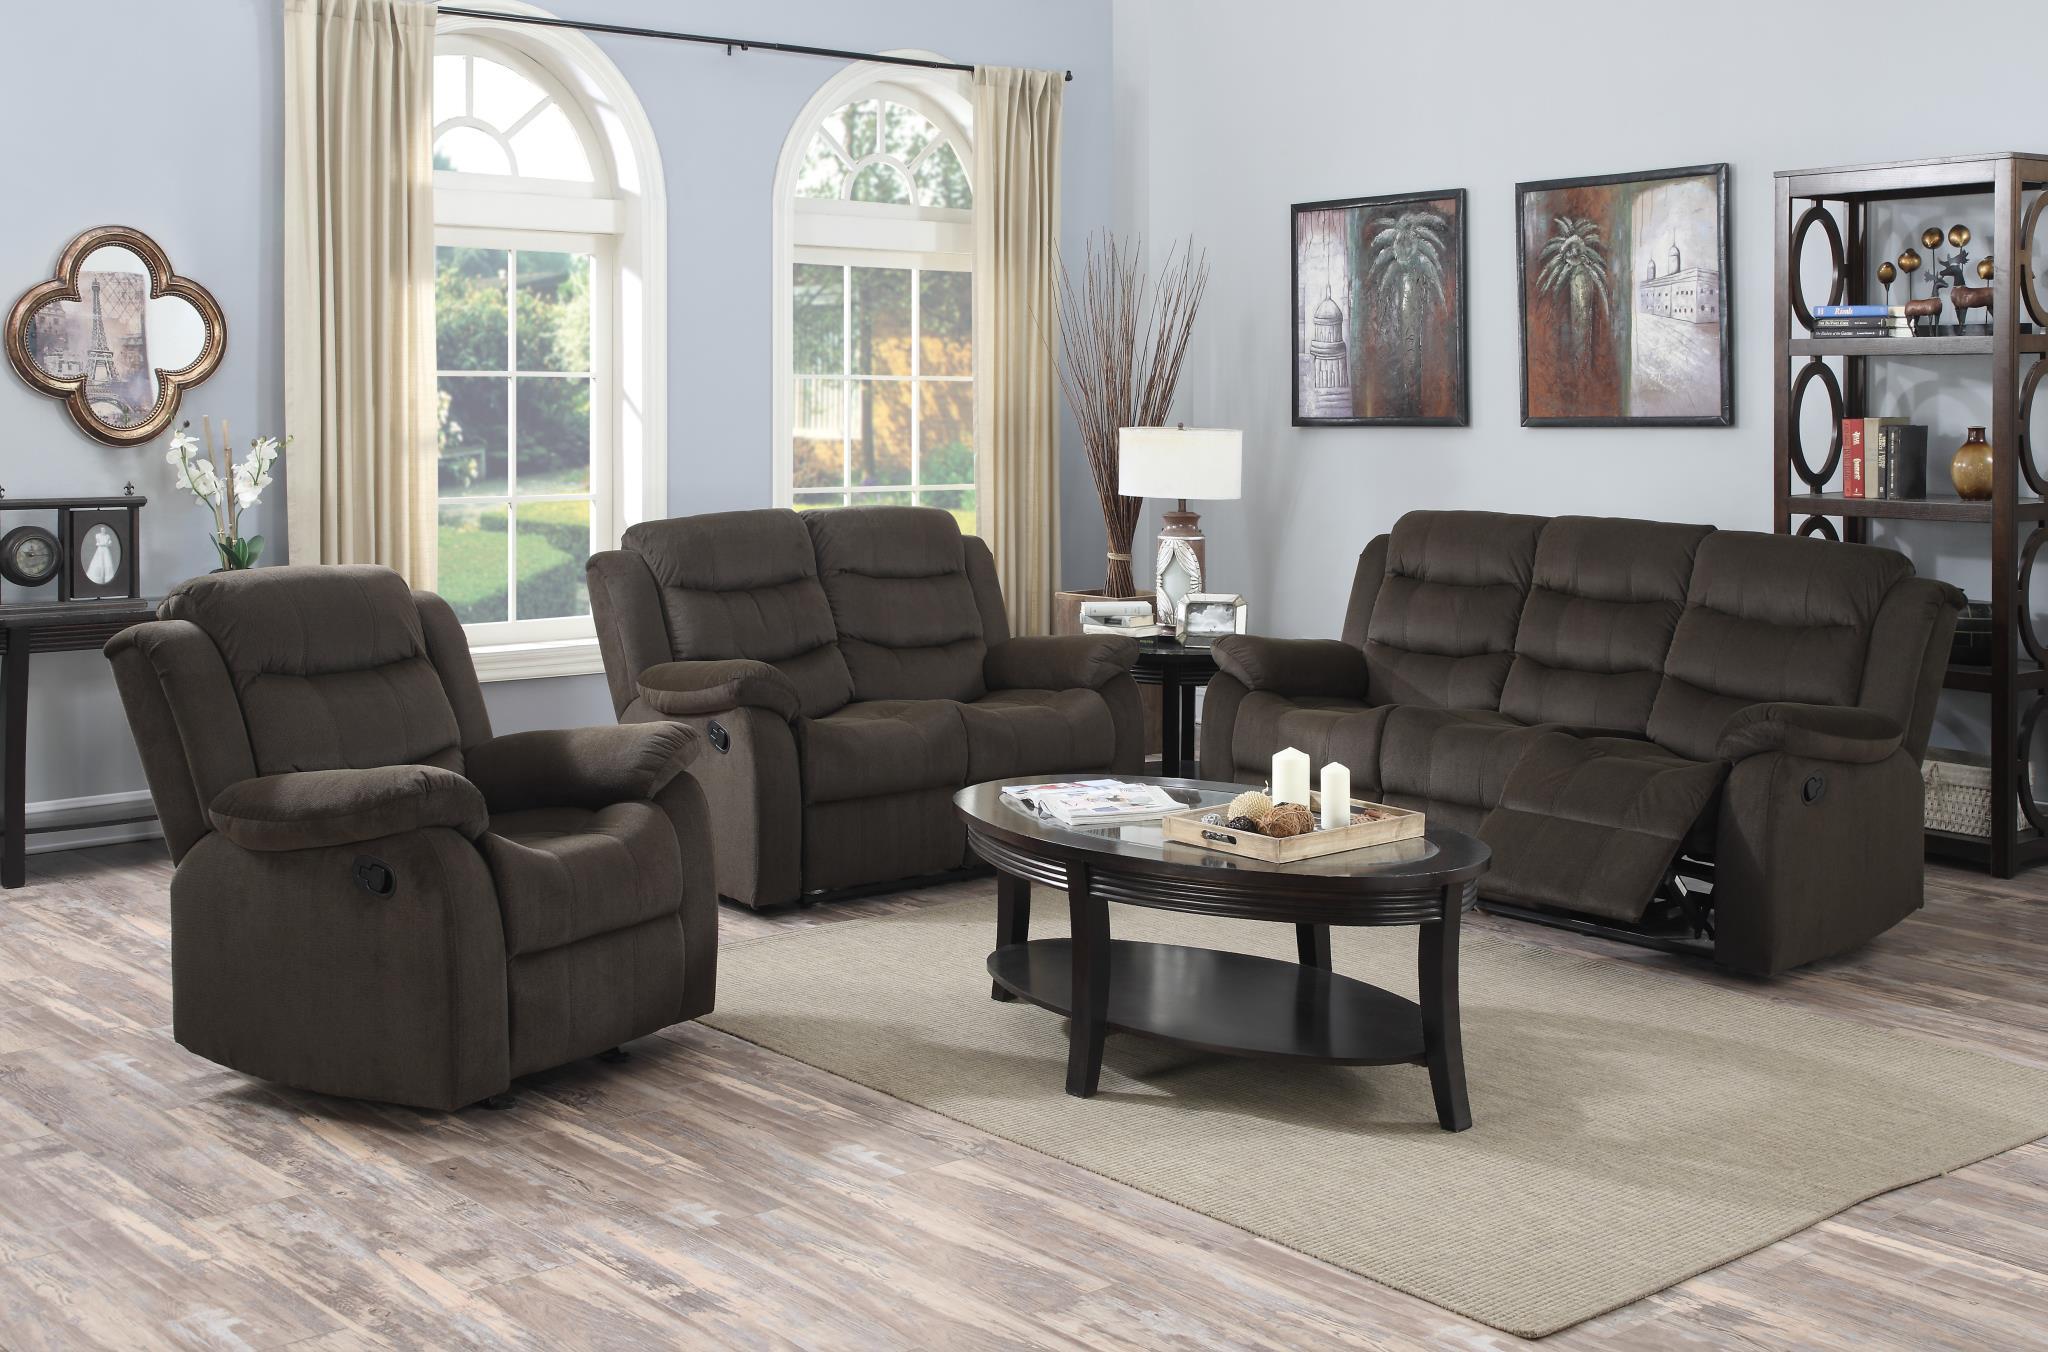 MYCO Furniture Candice Sectional Living Room Set